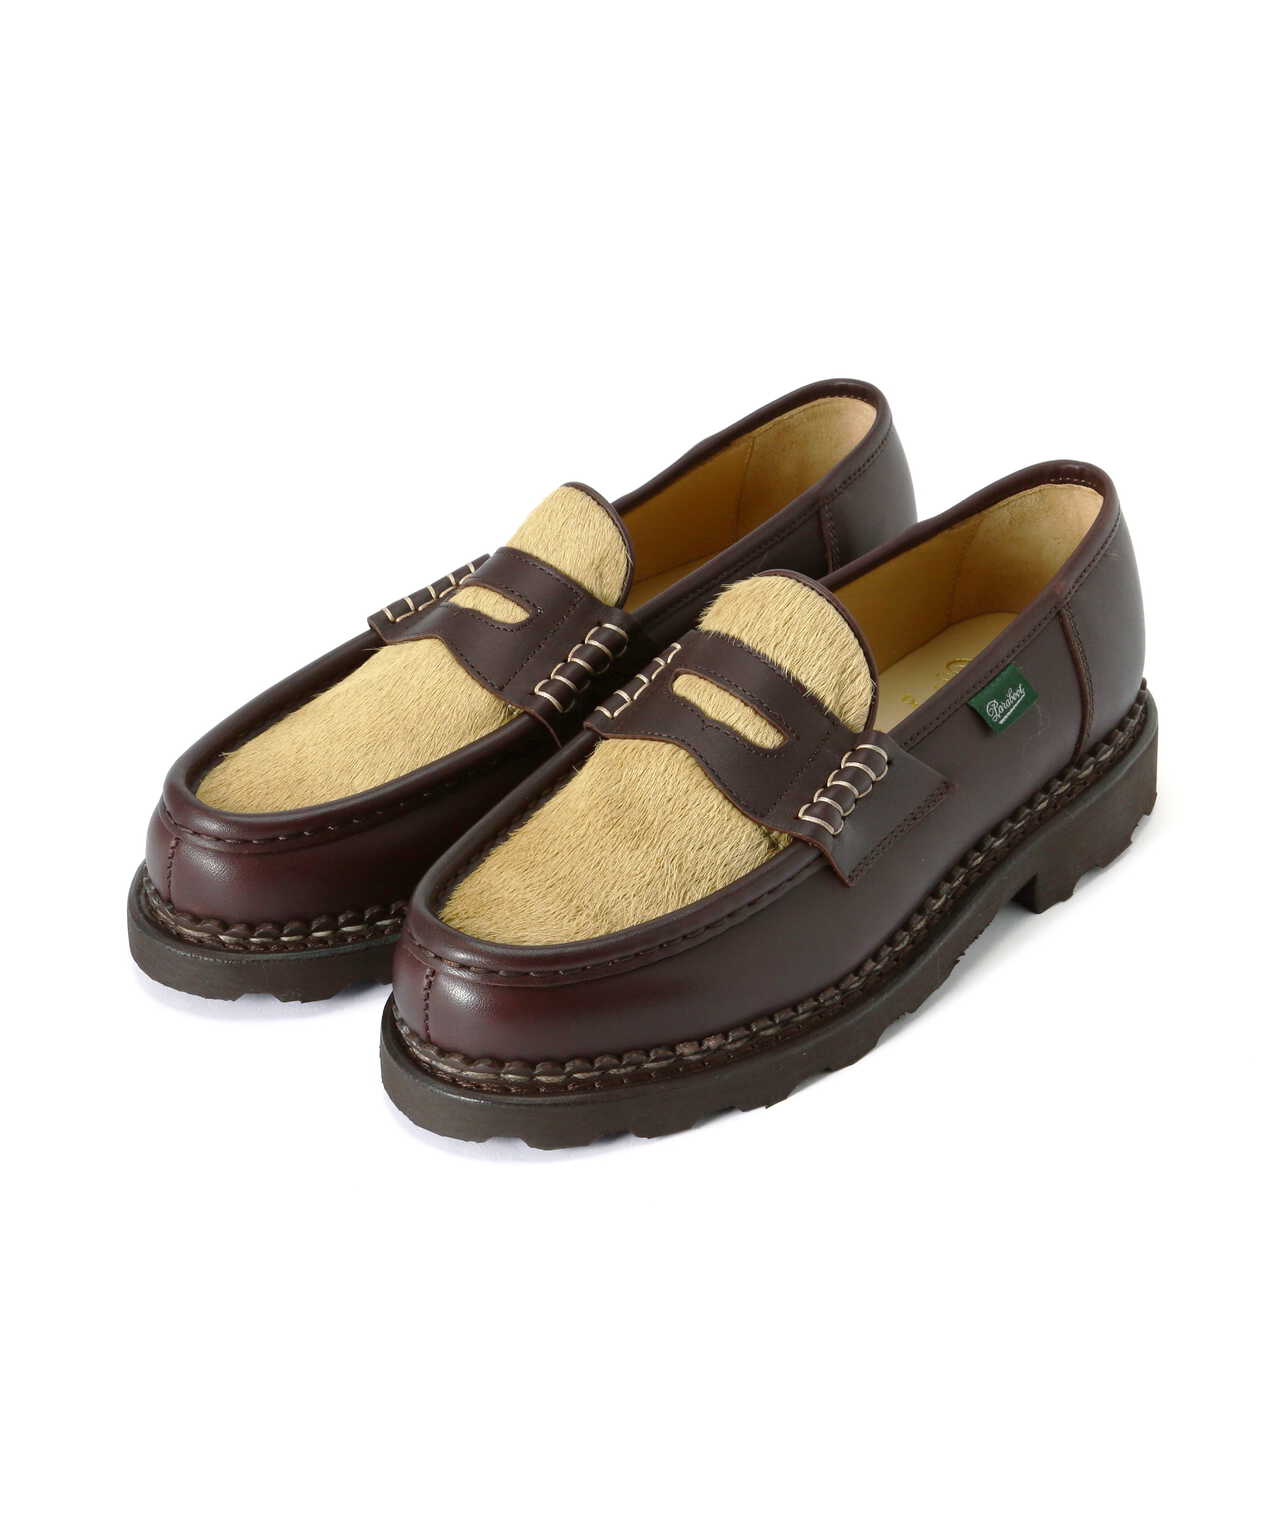 DROLE DE MONSIEUR X PARABOOT LOAFER(アウトレット商品・箱に傷あり) | B'2nd ( ビーセカンド ) | US  ONLINE STORE（US オンラインストア）